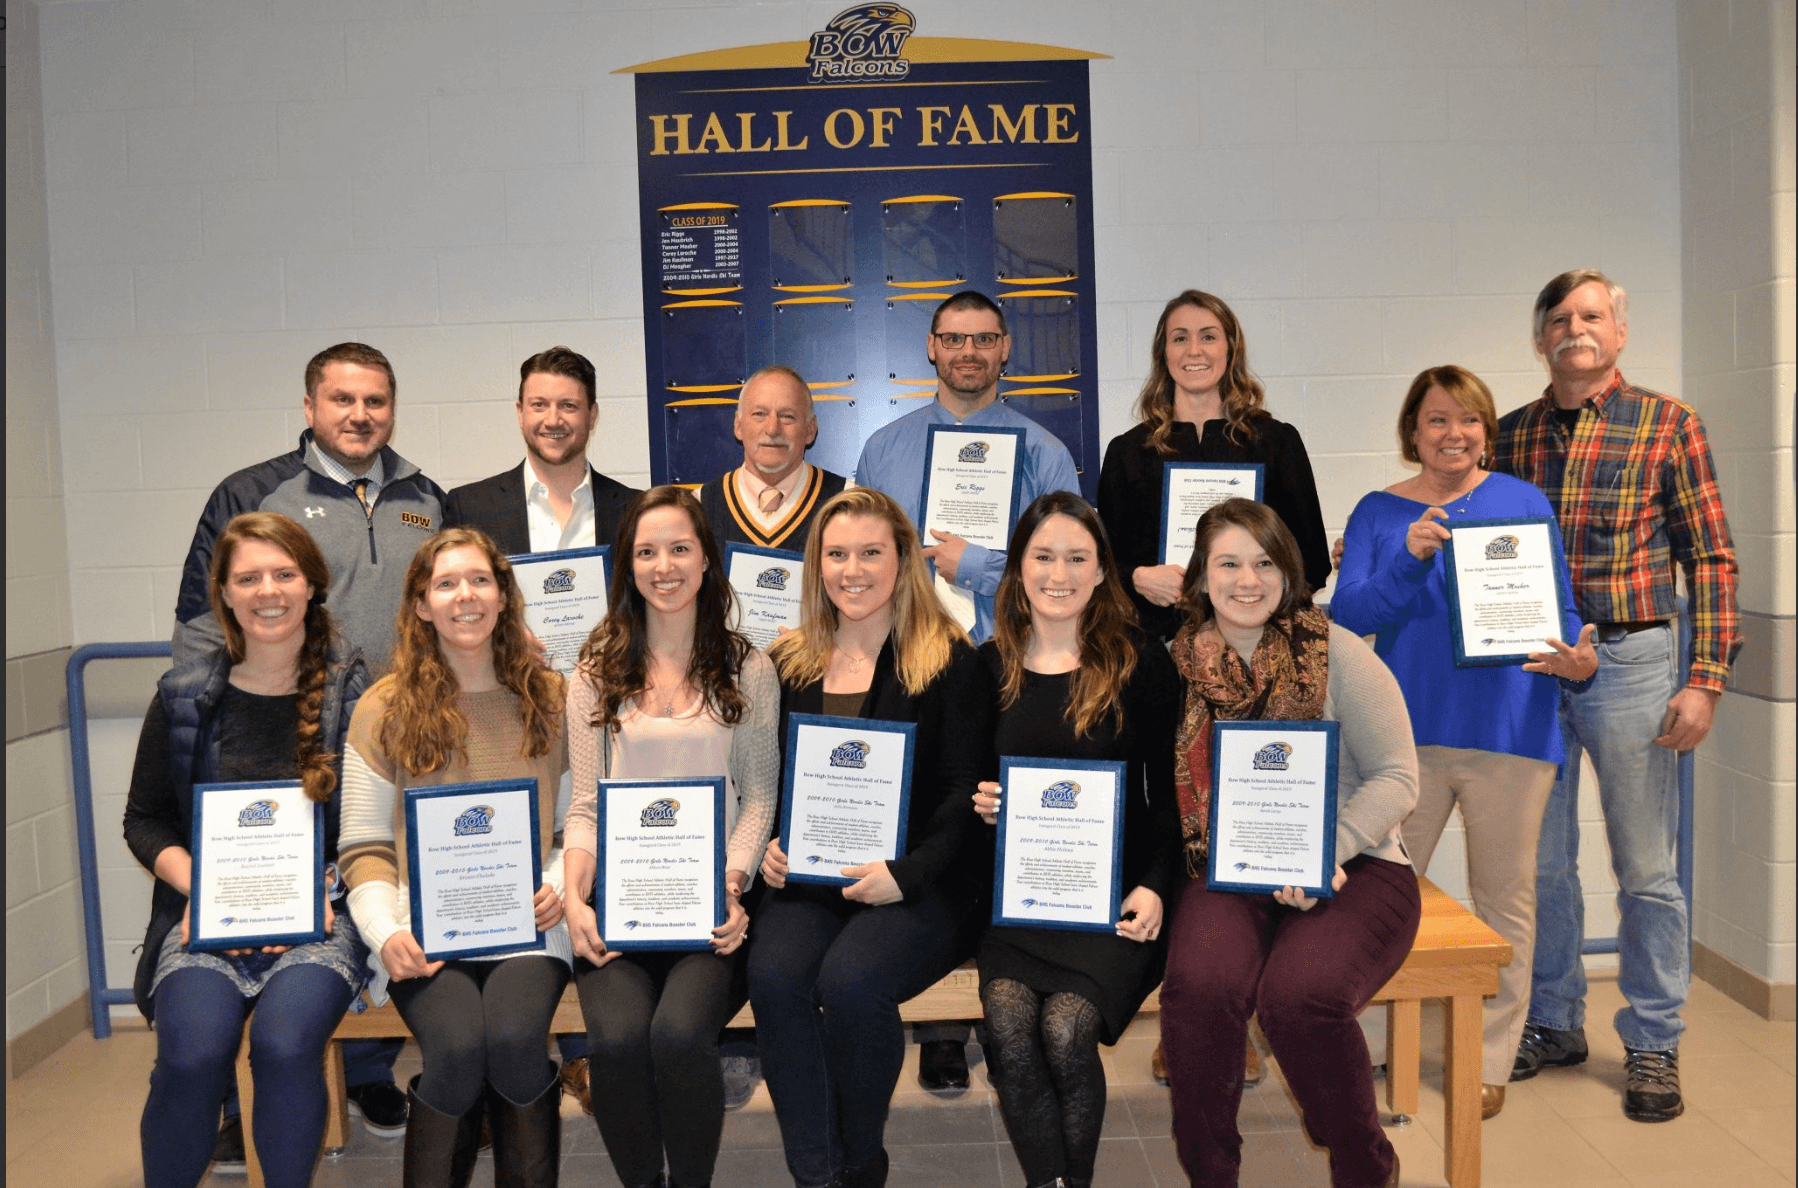 (Back row left to right: Athletic Director Mike Desilets, Corey Laroche, Jim Kaufman, Eric Riggs, Jen Haubrich (Fithian), and the parents of Tanner Mosher)  (Front row left to right: Rachel Gottlieb, Kristen Chulada, Allison Baier, Julia Romano, Abbie Holmes, and Sarah Large)